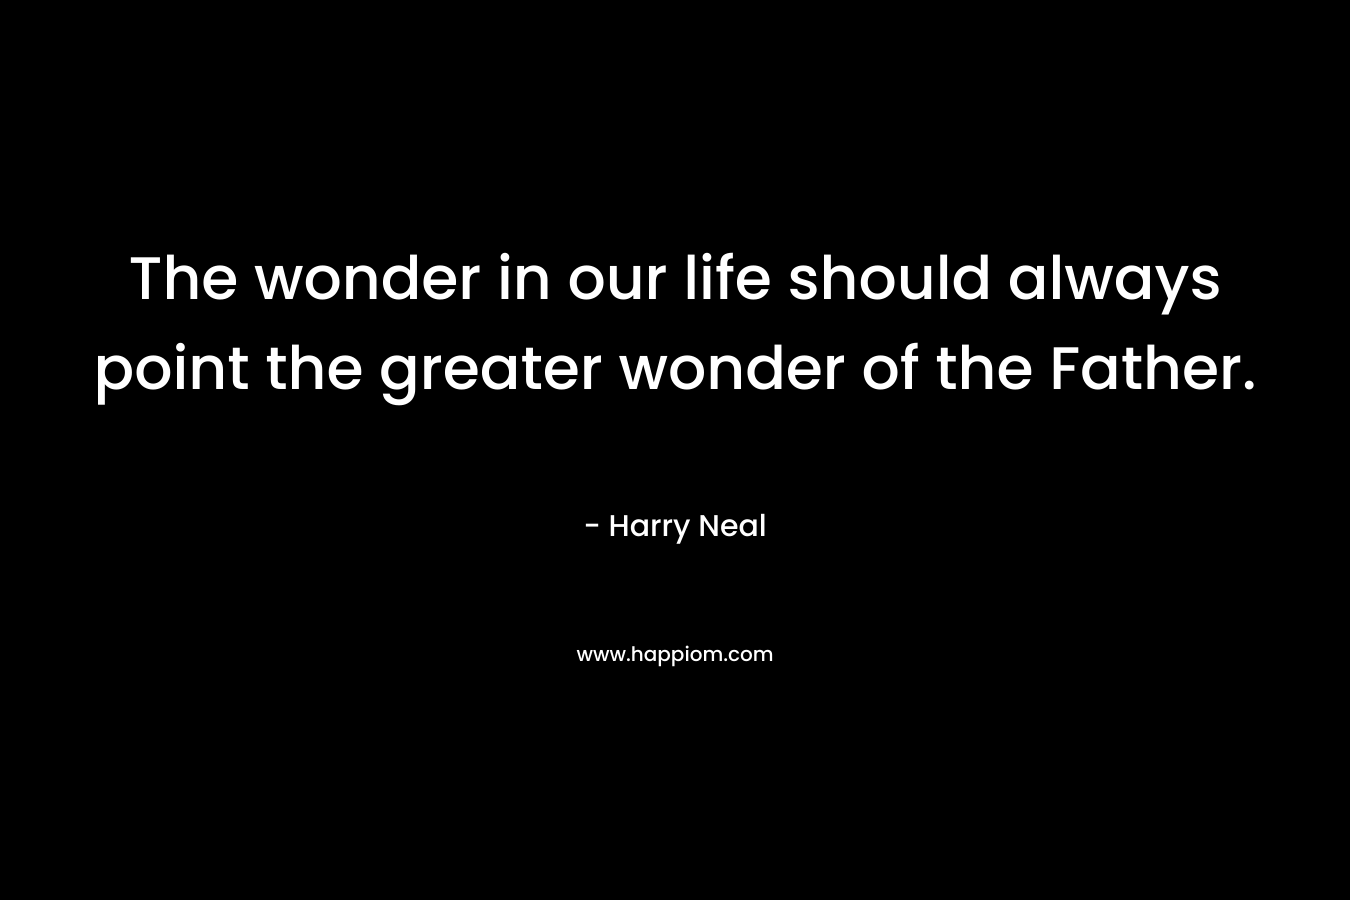 The wonder in our life should always point the greater wonder of the Father.